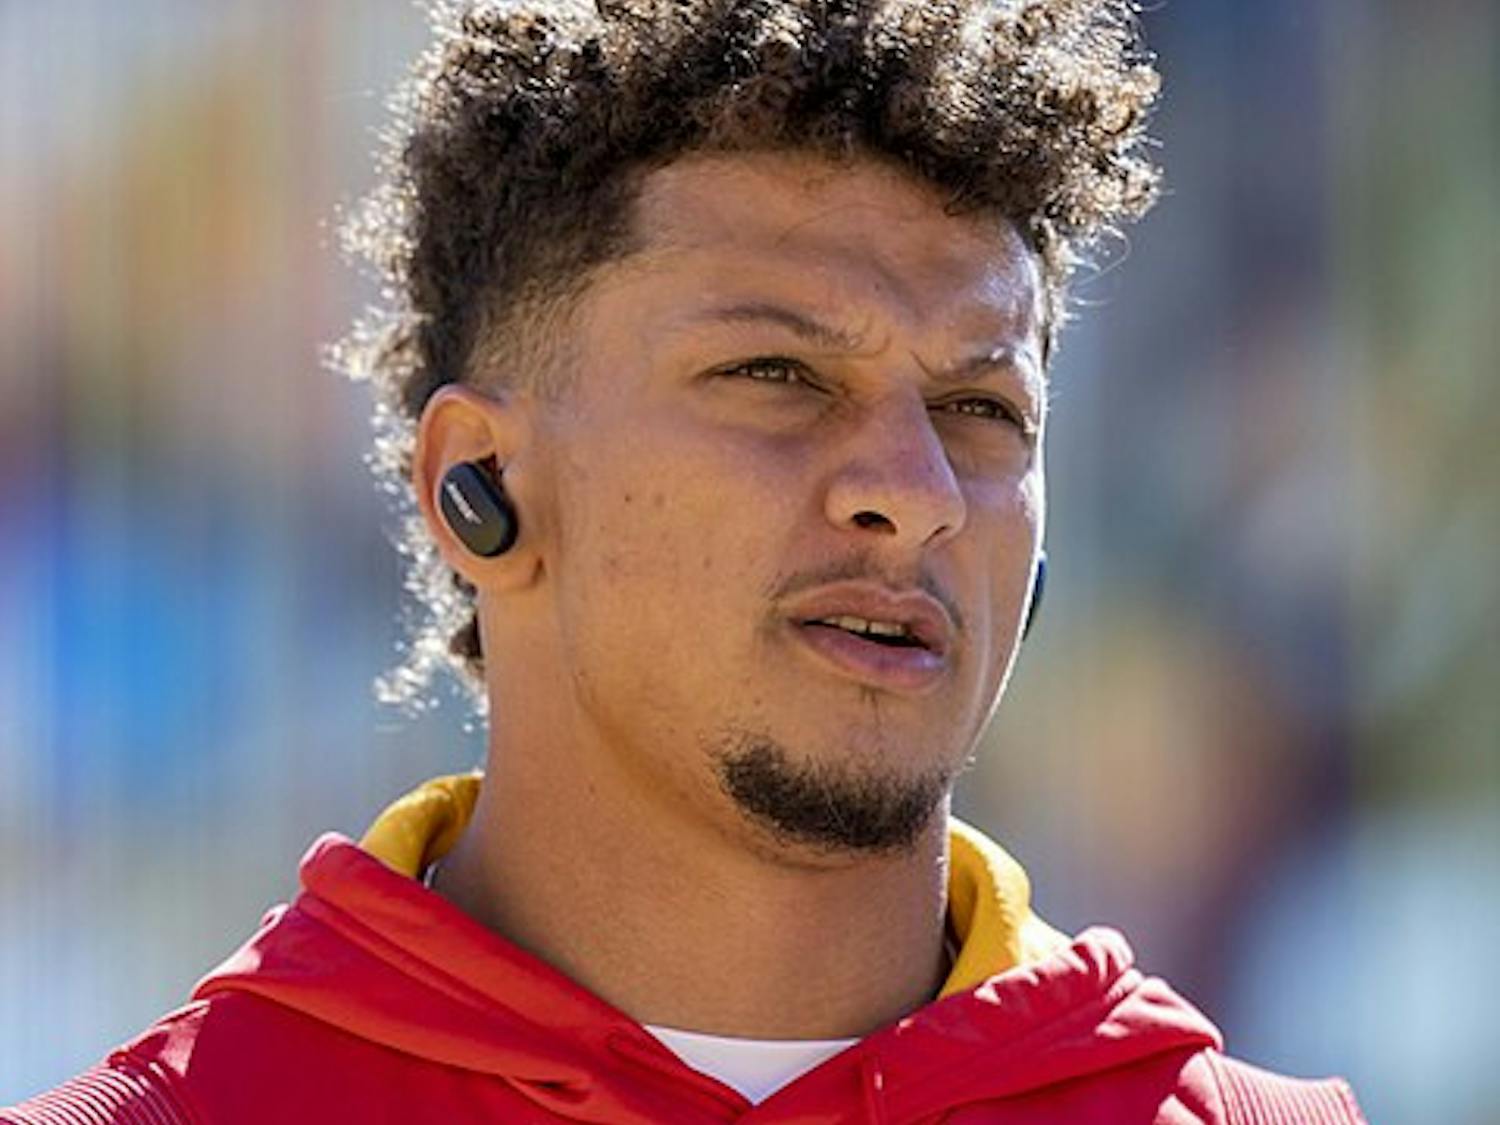 Quarterback Patrick Mahomes led the Chiefs to their third Super Bowl in five years (Photo courtesy of All-Pro Reels / Wikimedia Commons).